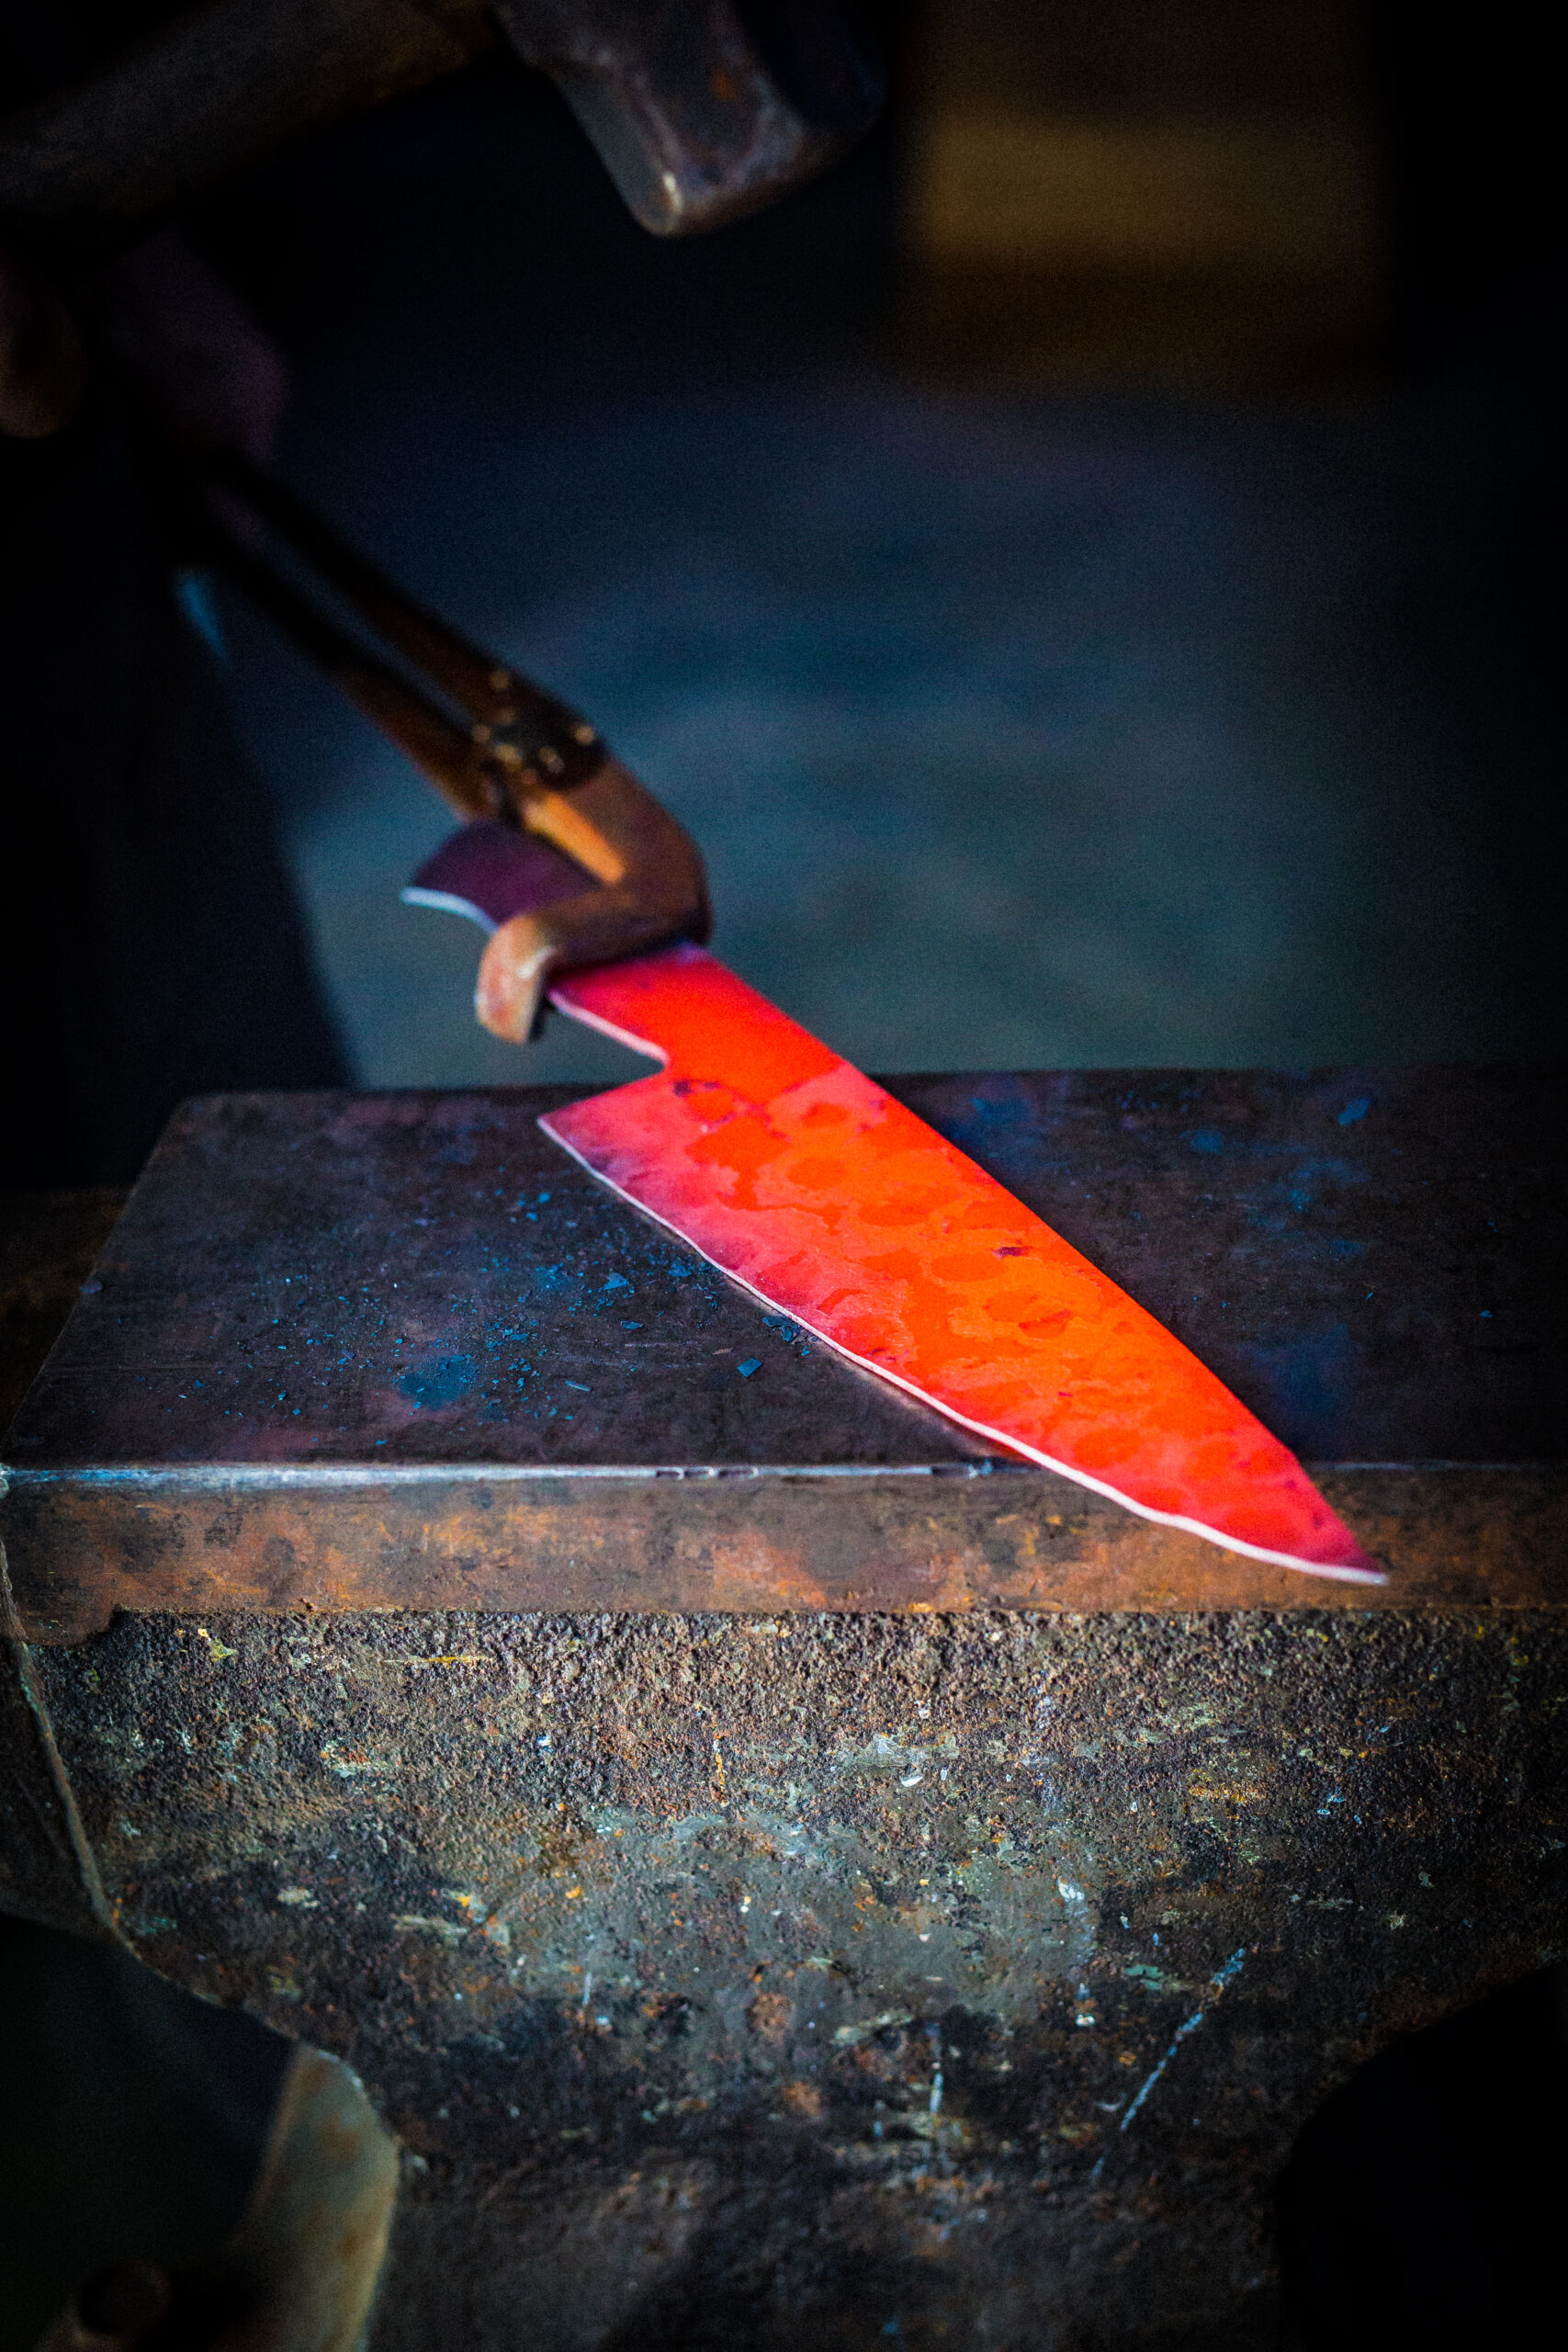 During forging, Seral's knives are heated to 2000 degrees, then pounded with an antique power hammer and shaped by hand. (John Troxell)